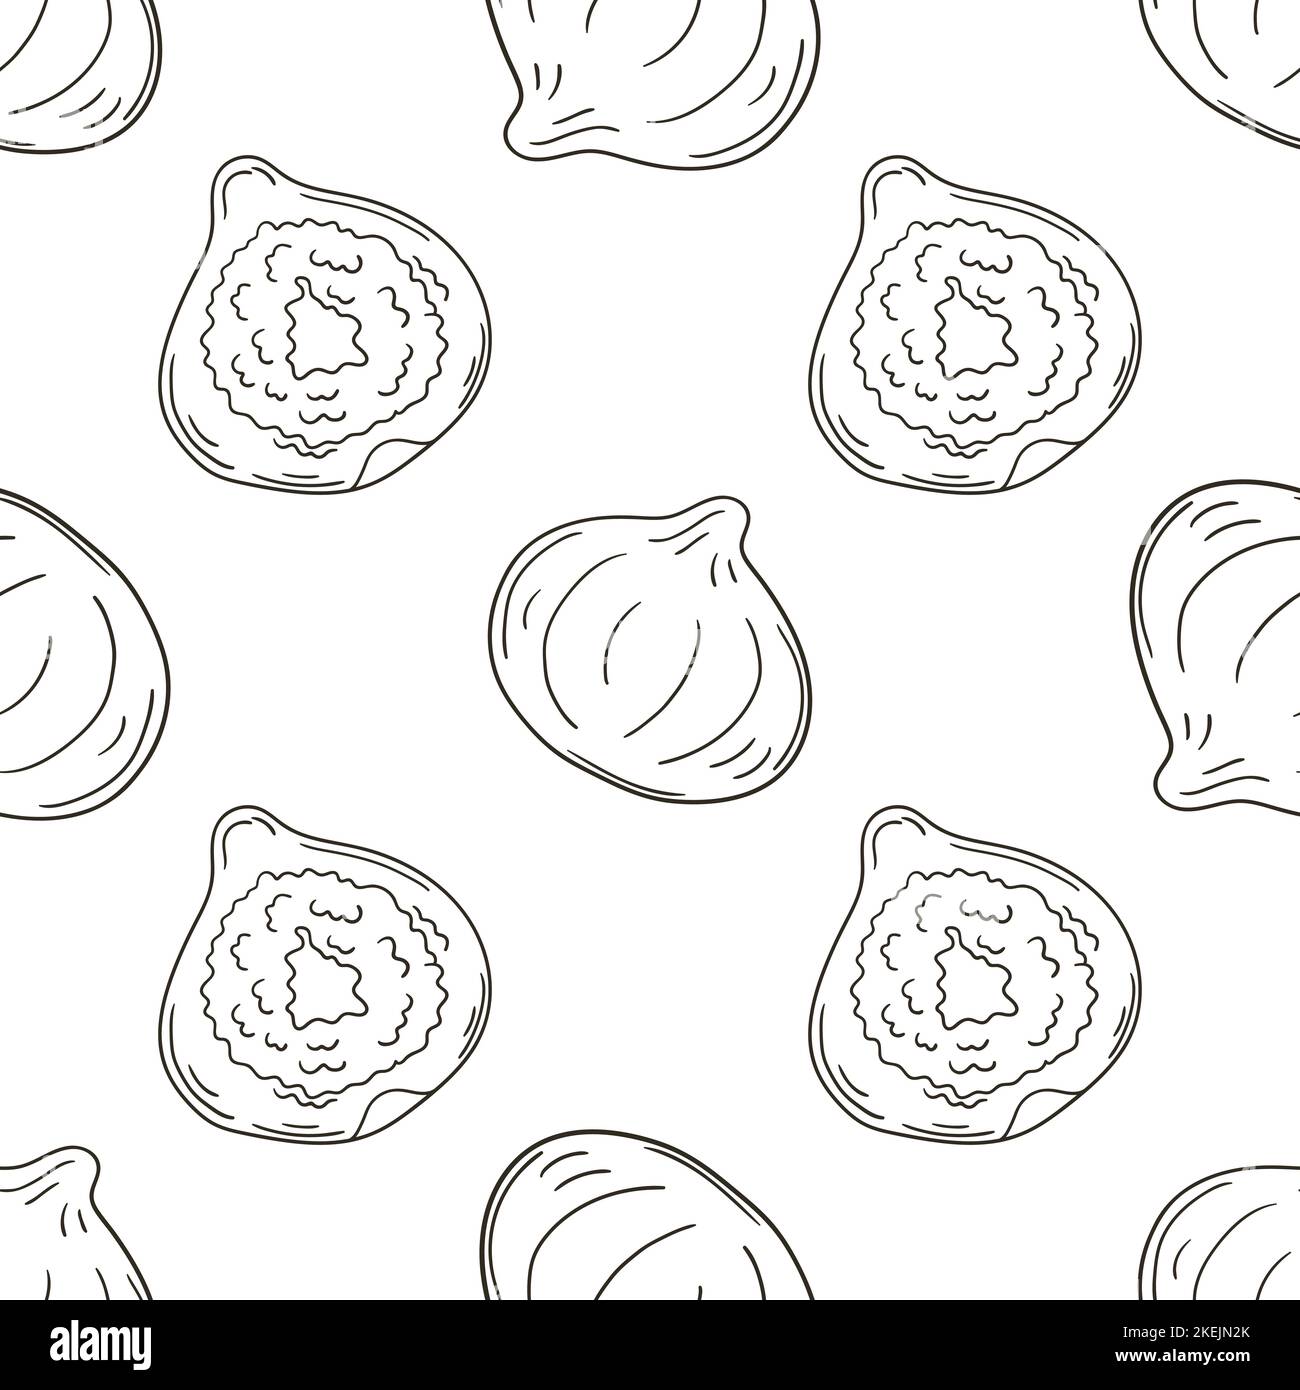 Monochrome Pattern For Restaurant Or Shop Figs Illustration In Hand Draw Style Can Be Used 0234